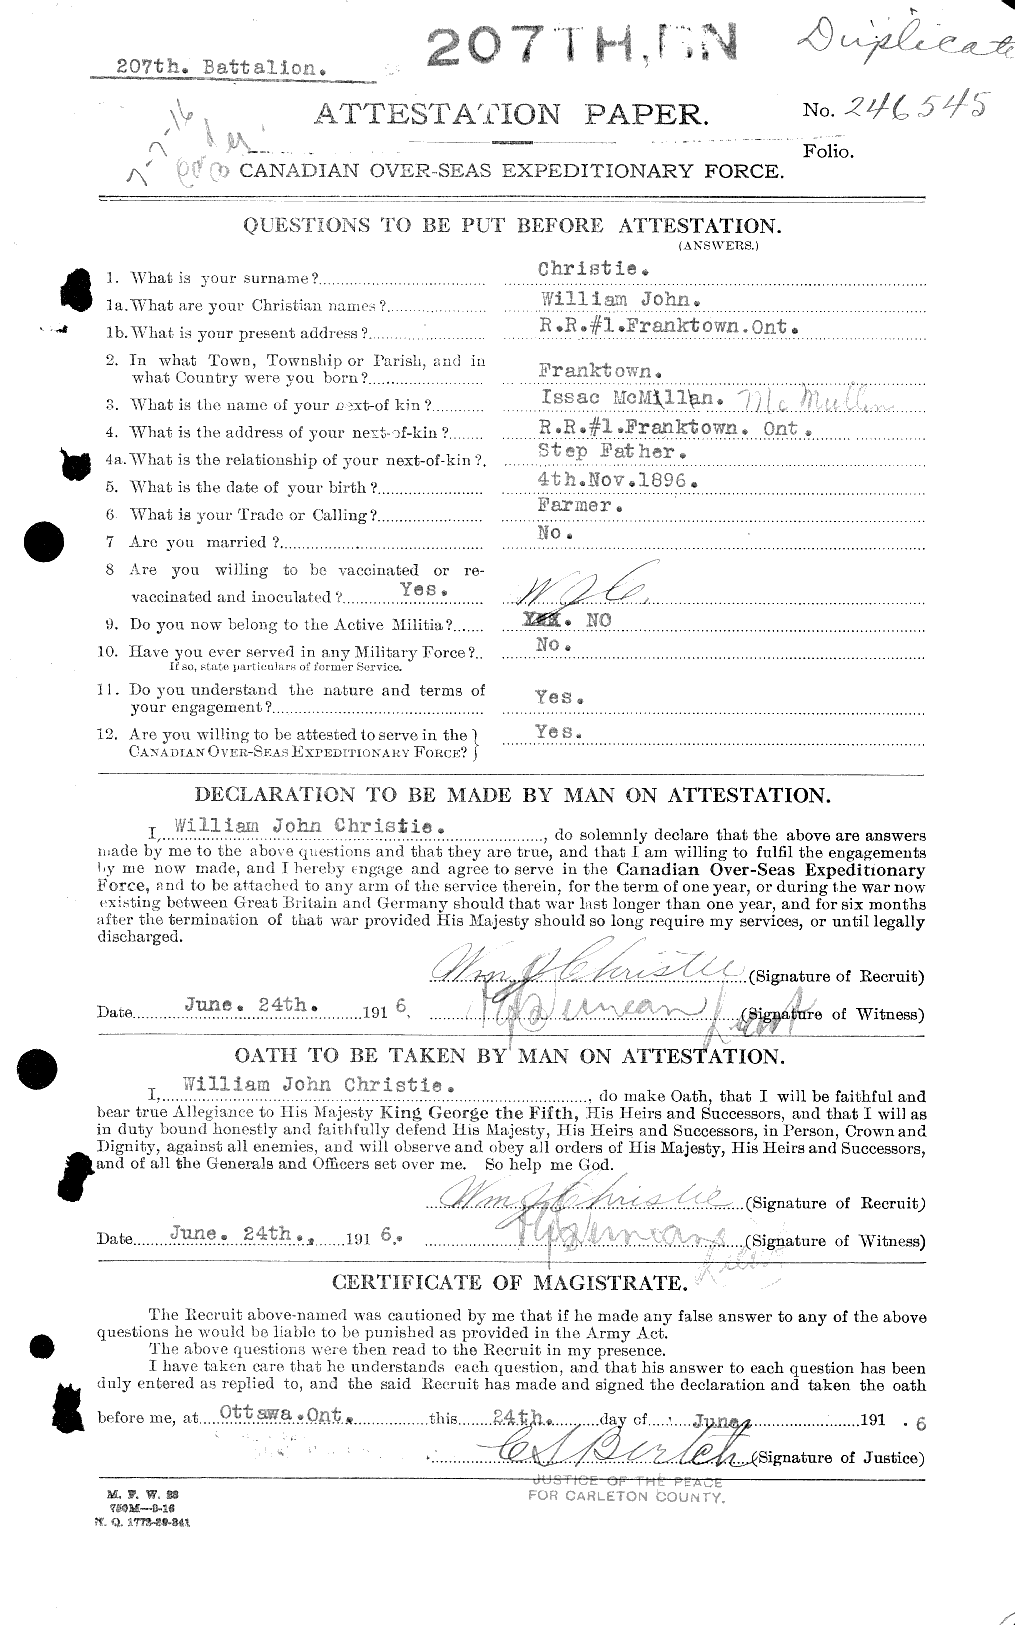 Personnel Records of the First World War - CEF 022101a